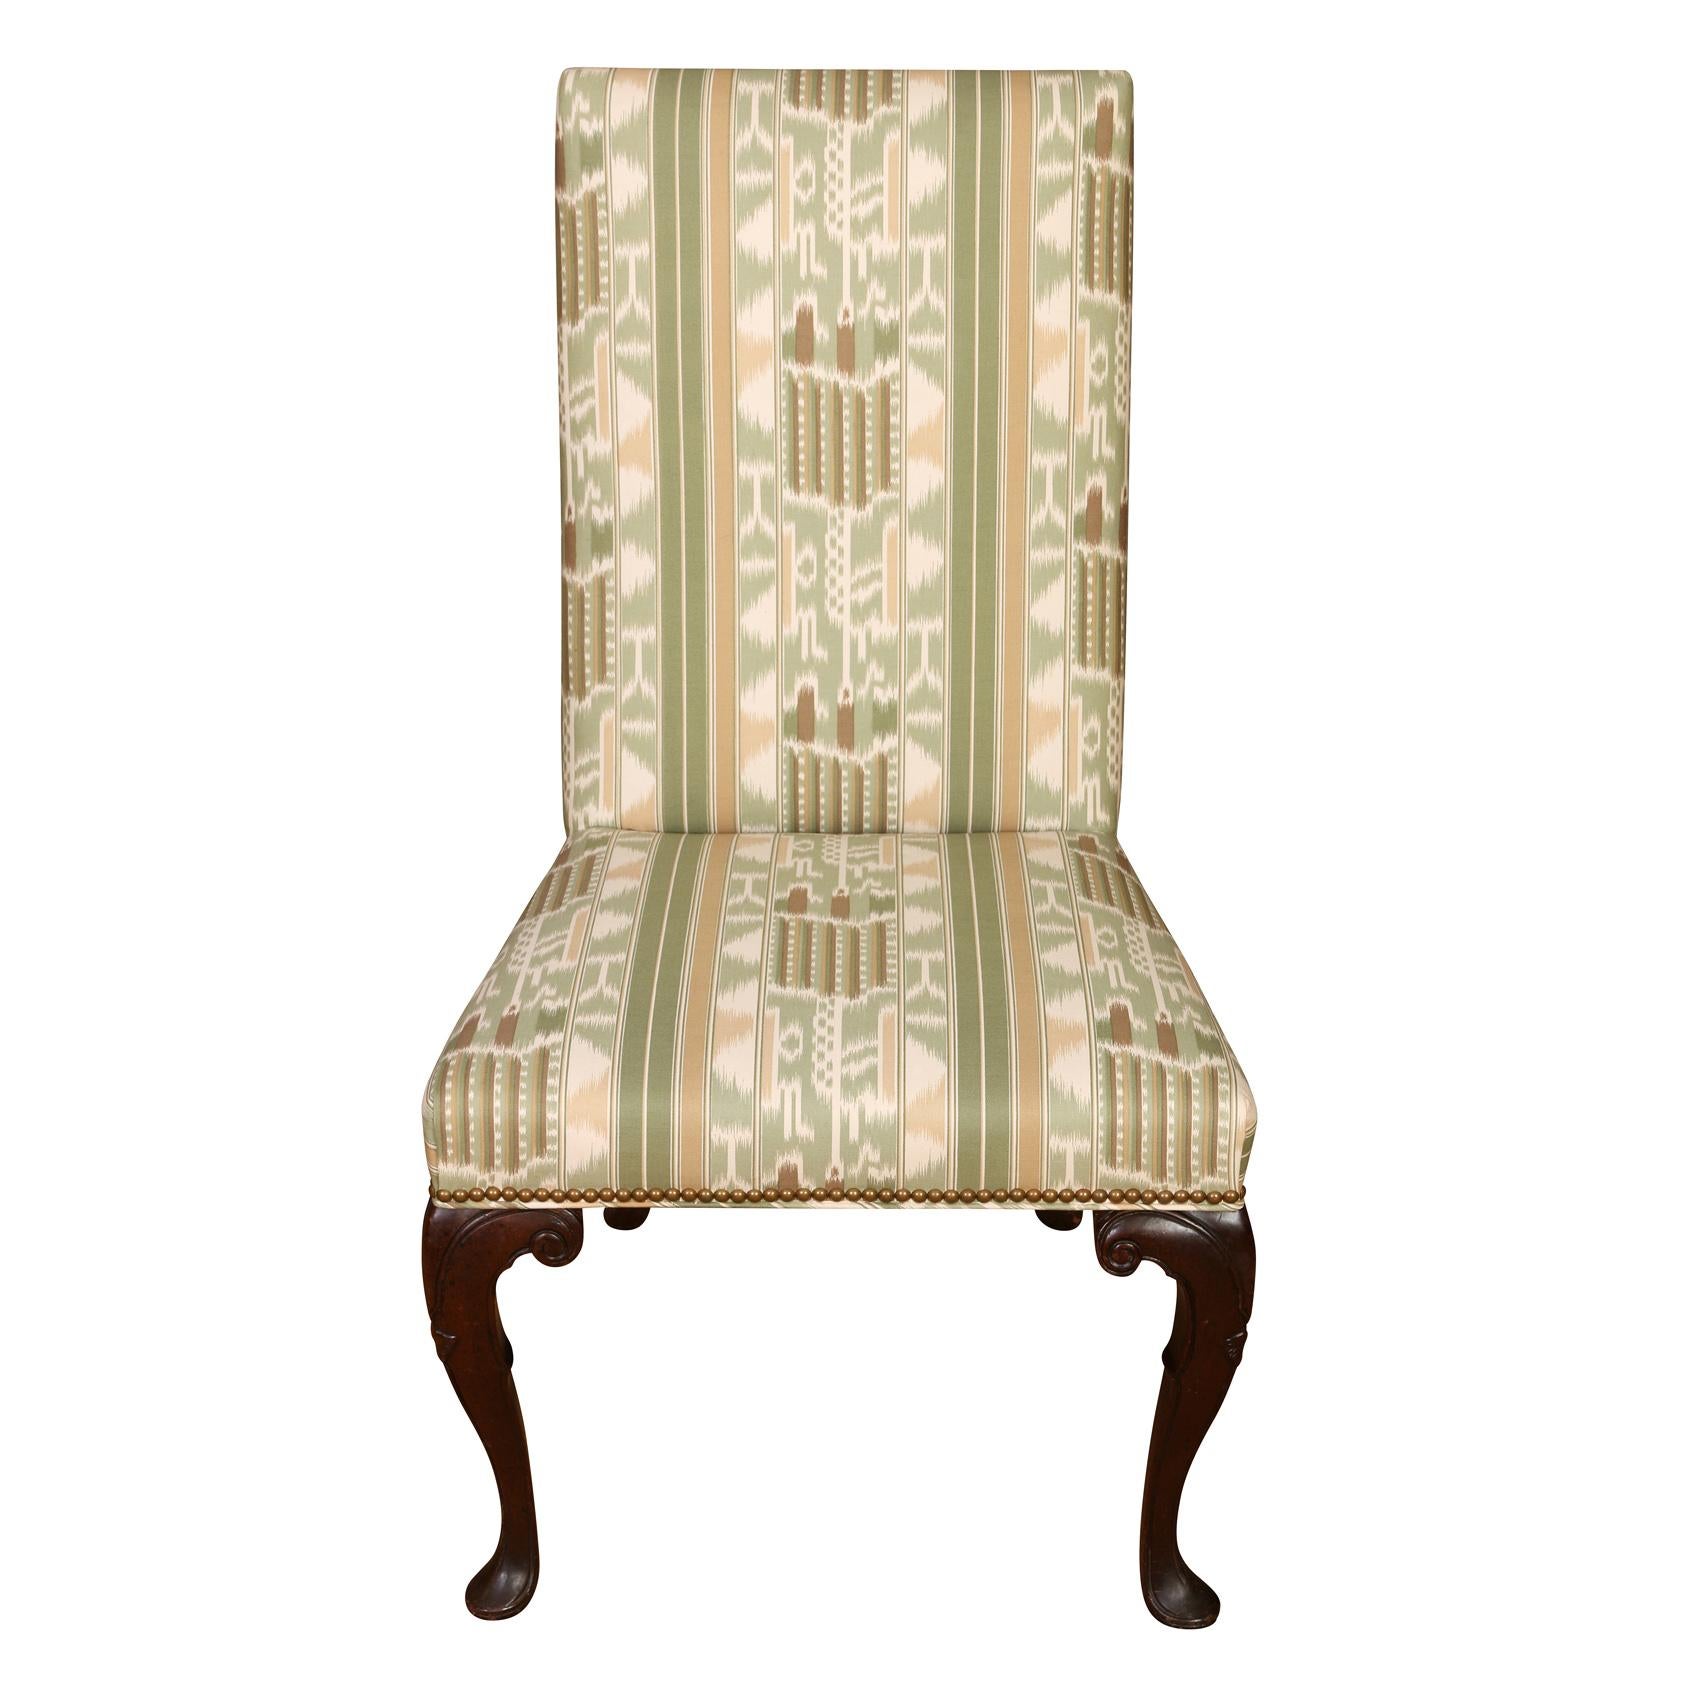 A set of eight vintage dining chairs in Queen Anne style with cabriole legs and upholstered seats and backs in green, gold and brown ikat fabric with nail head trim.